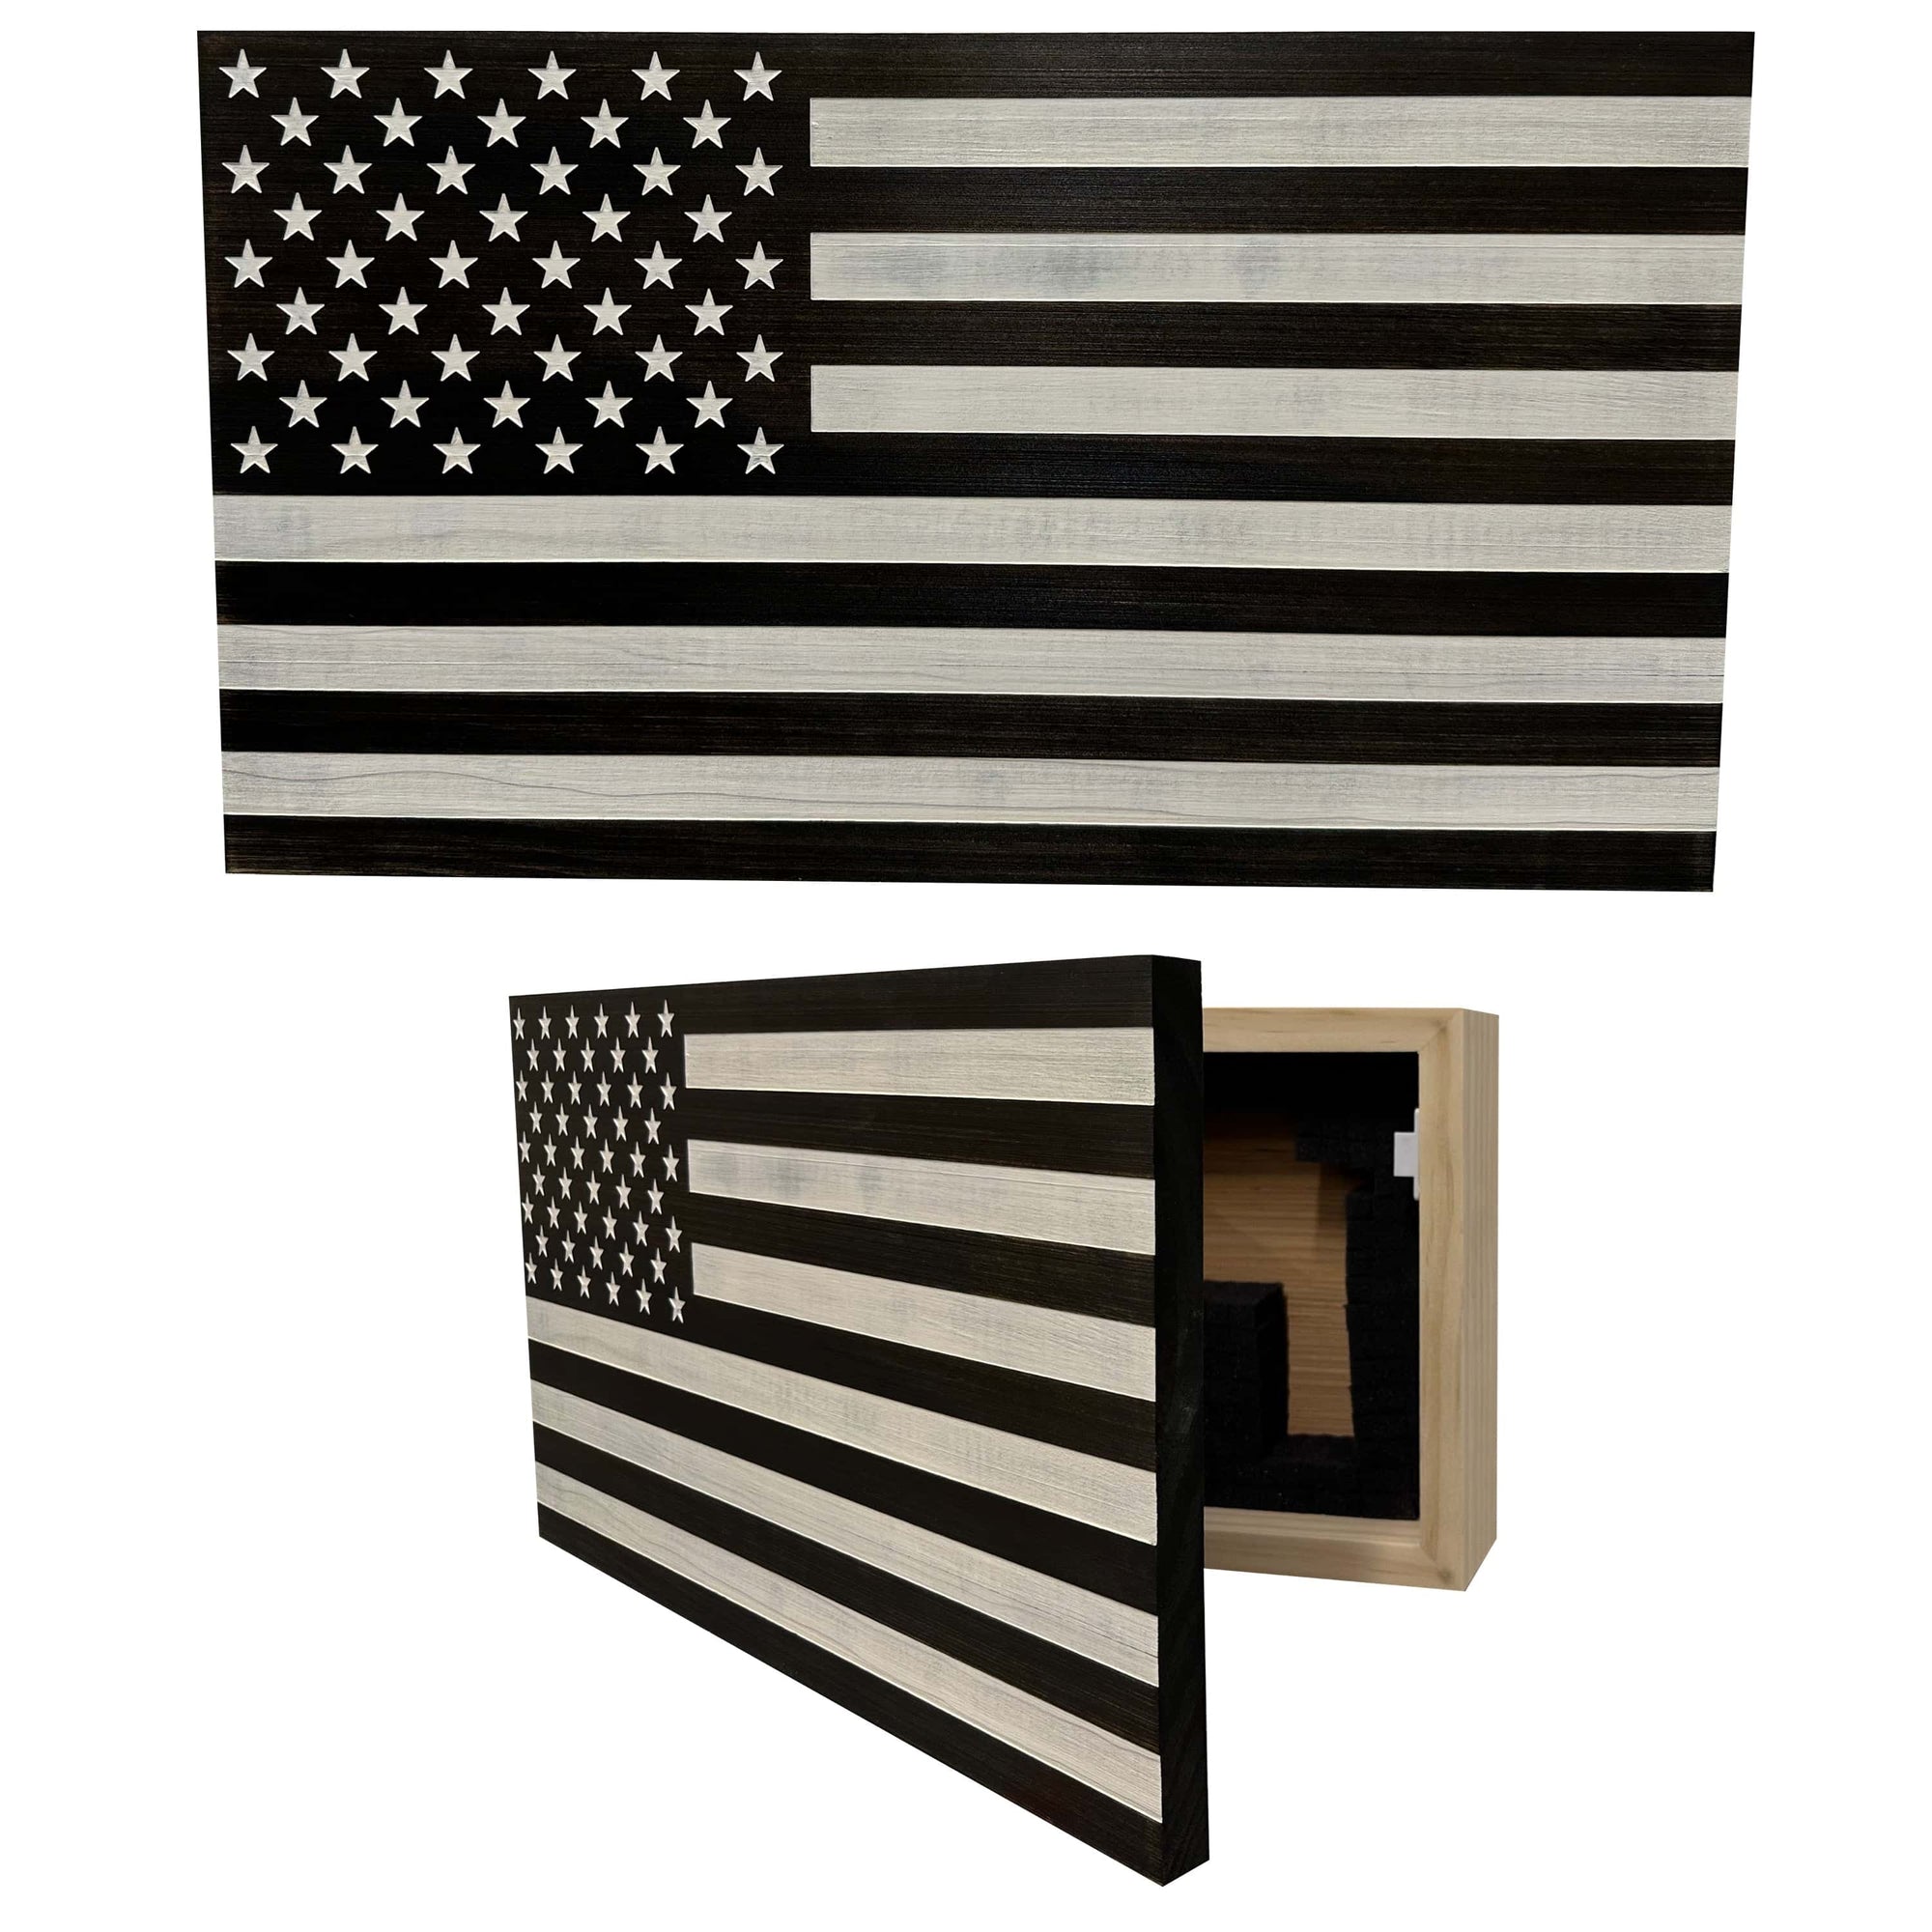 American Flag Decorative & Secure Wall-Mounted Gun Cabinet (Black & White Distressed) Armadillo Safe and Vault